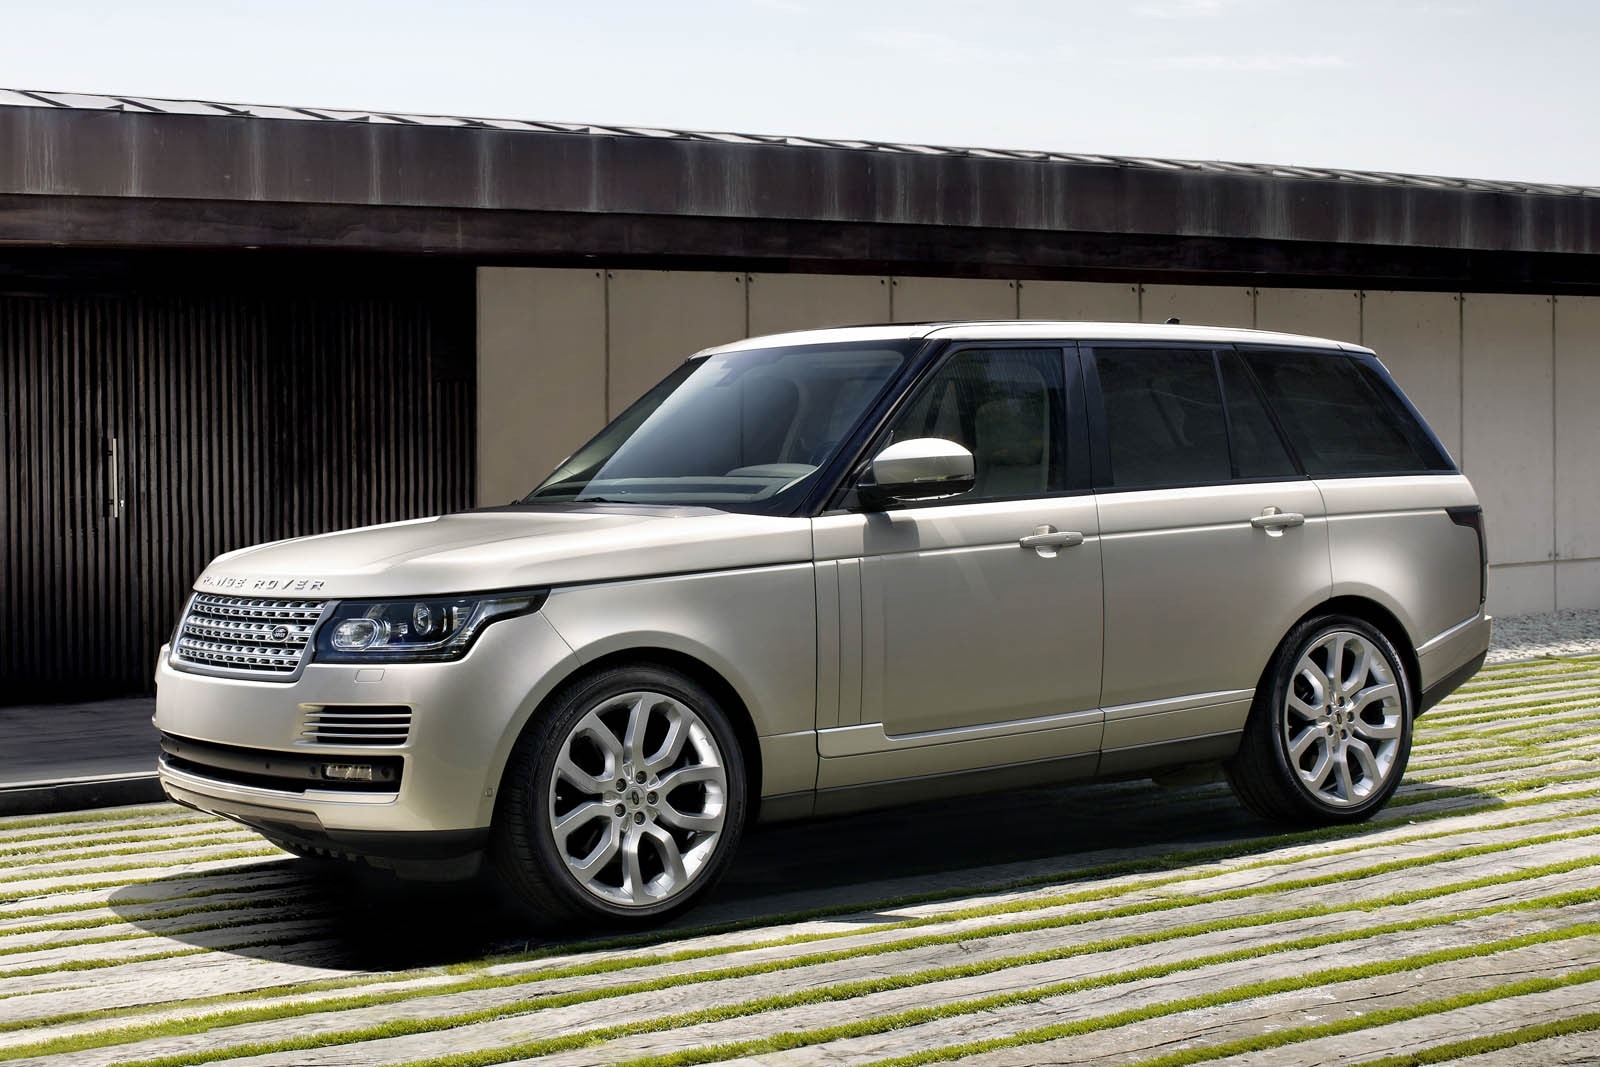 2013 Land Rover Range Rover Review & Ratings | Edmunds